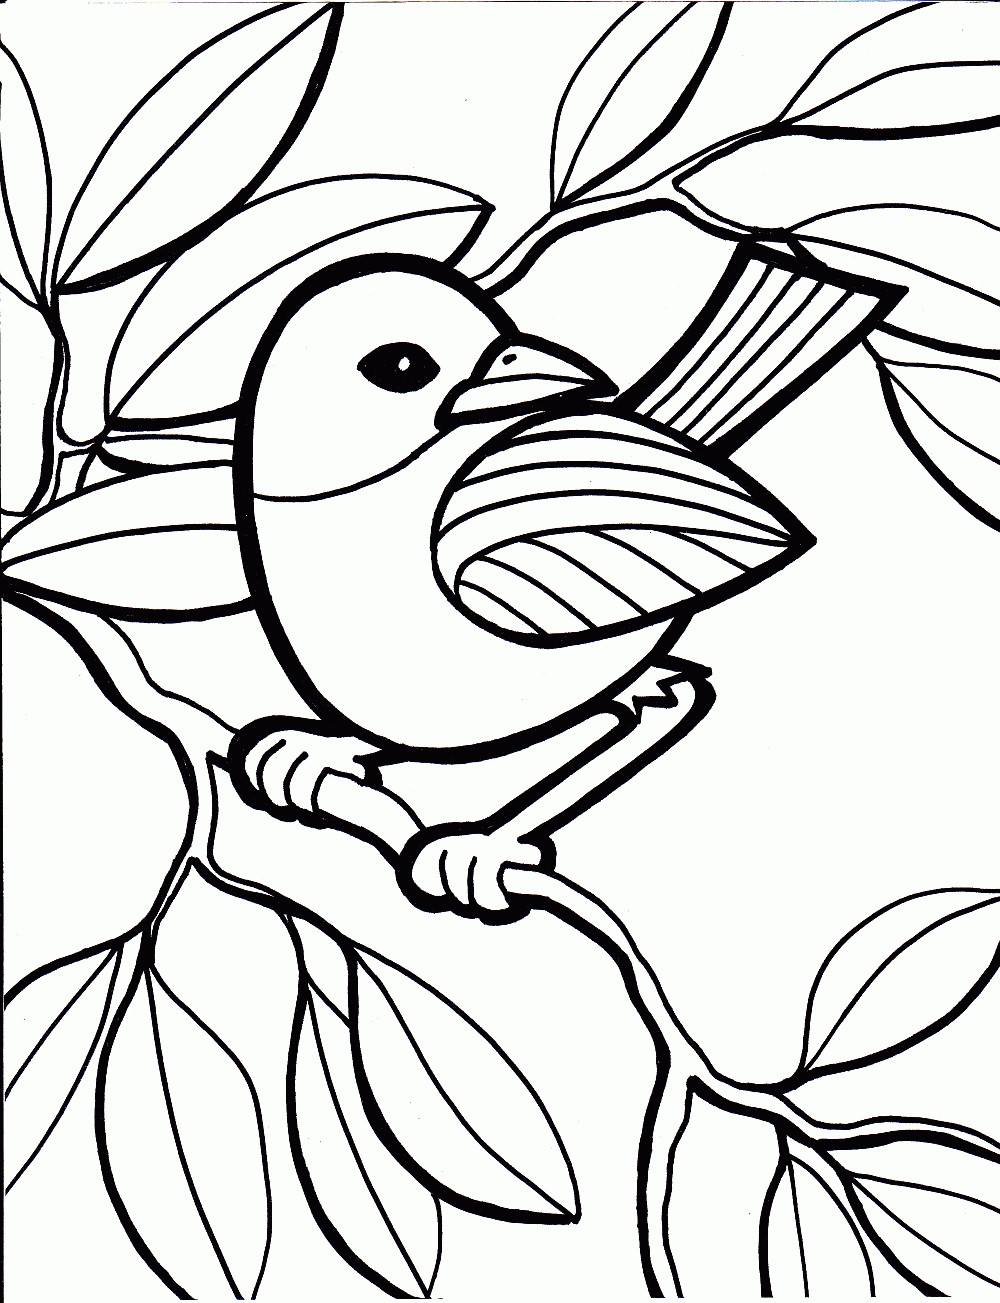 Cool Coloring Pages For Boys
 Free Coloring Pages For Kids Top Profile